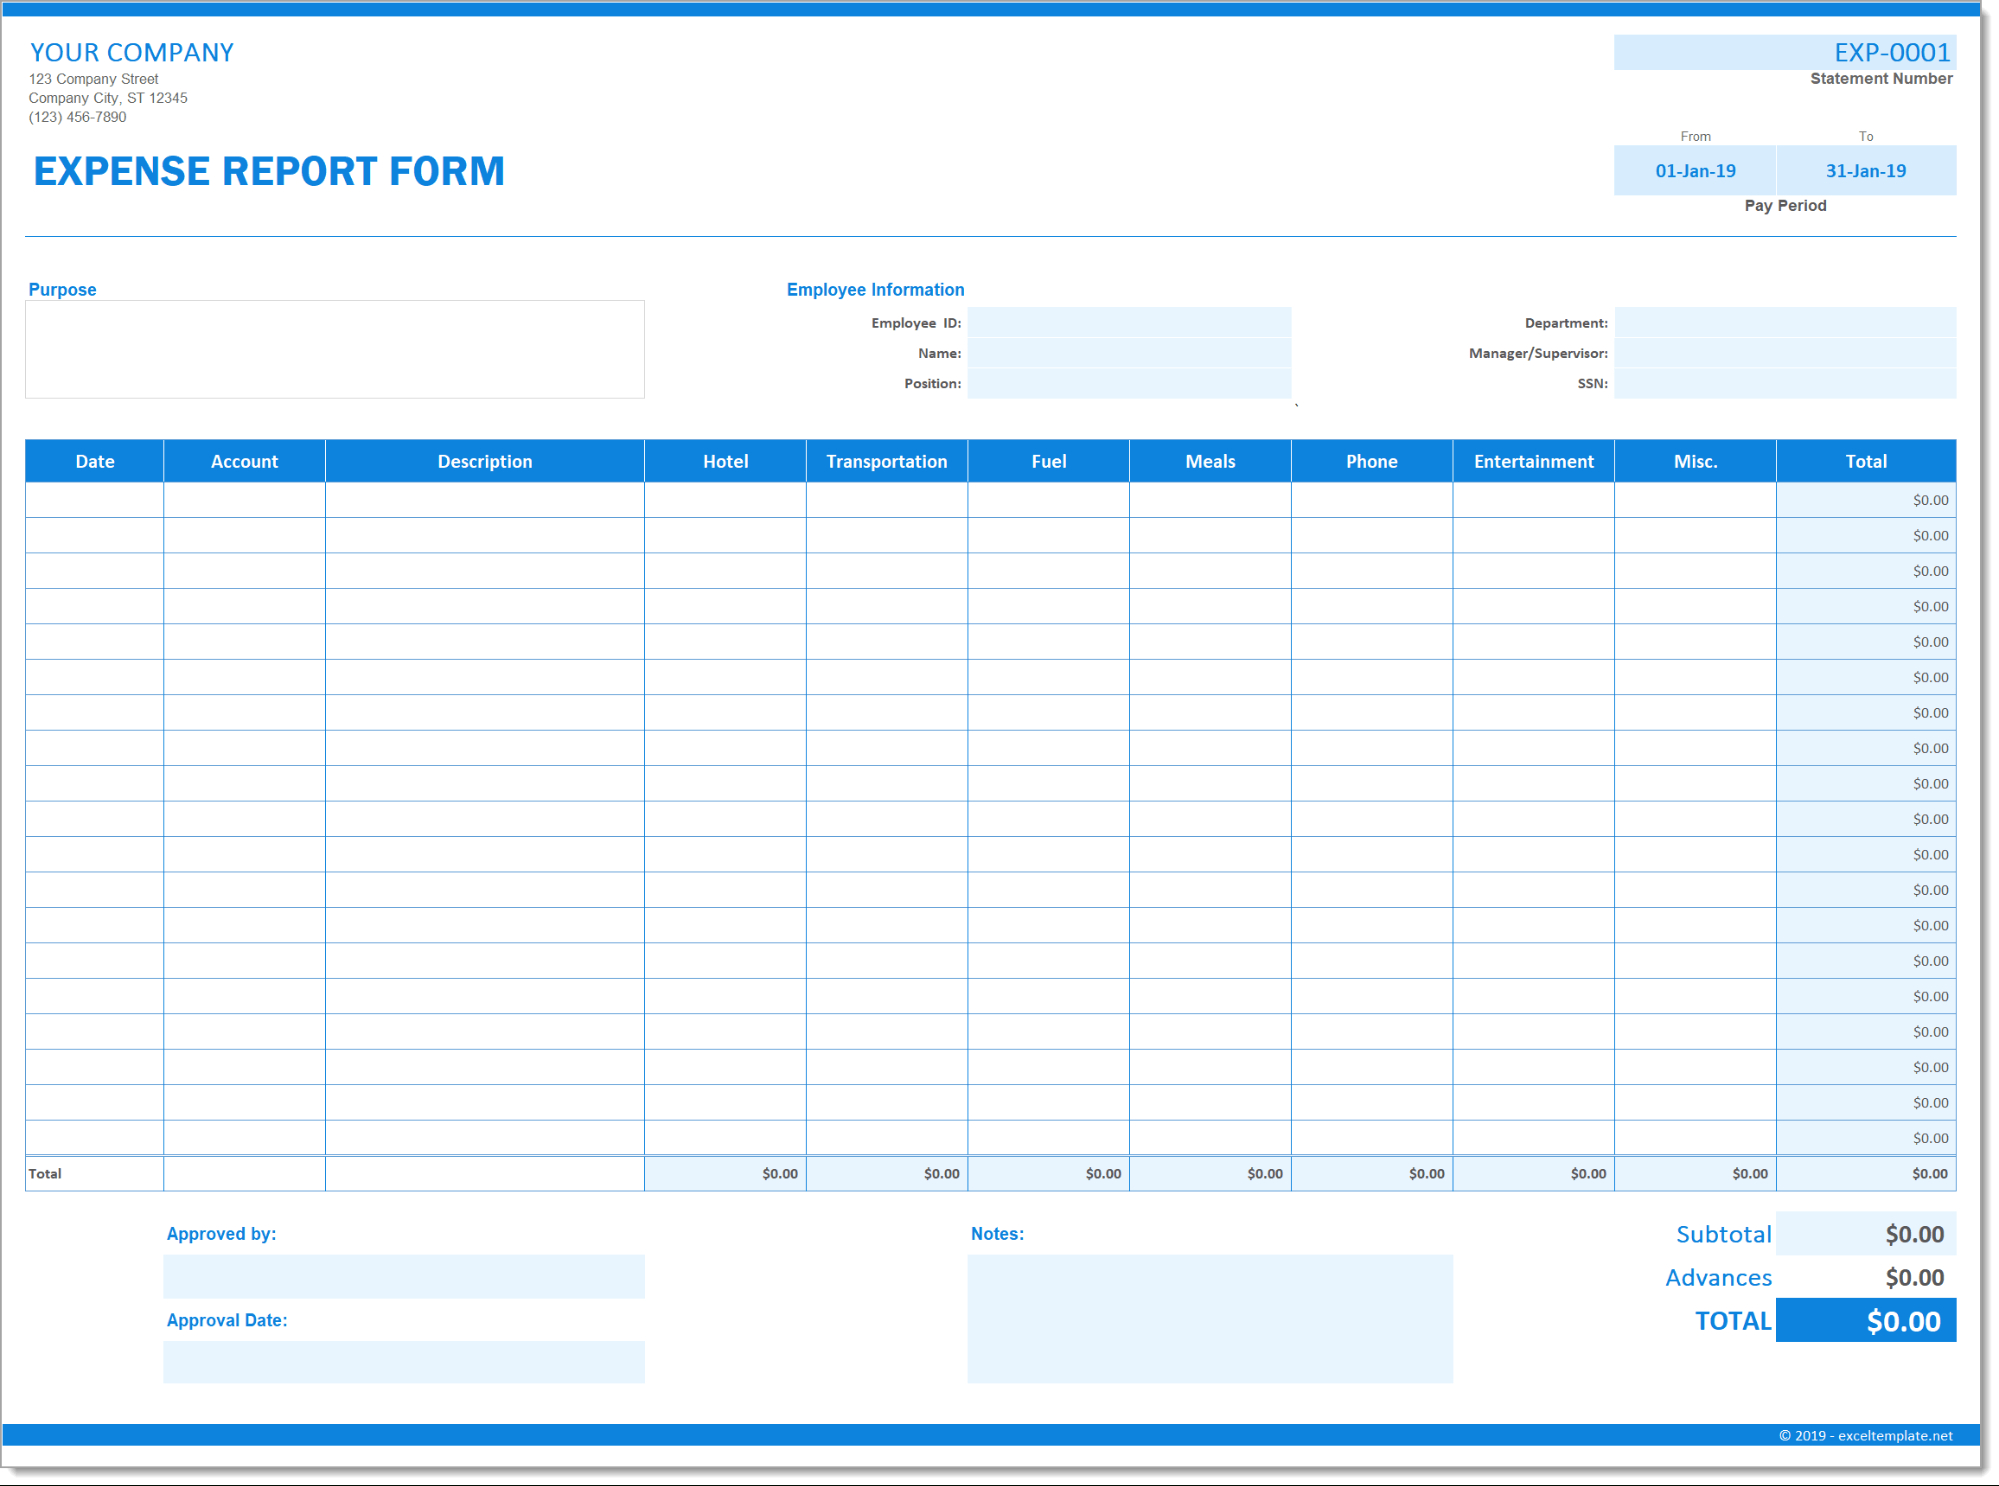 Expense Report Form With Gas Mileage Expense Report Template